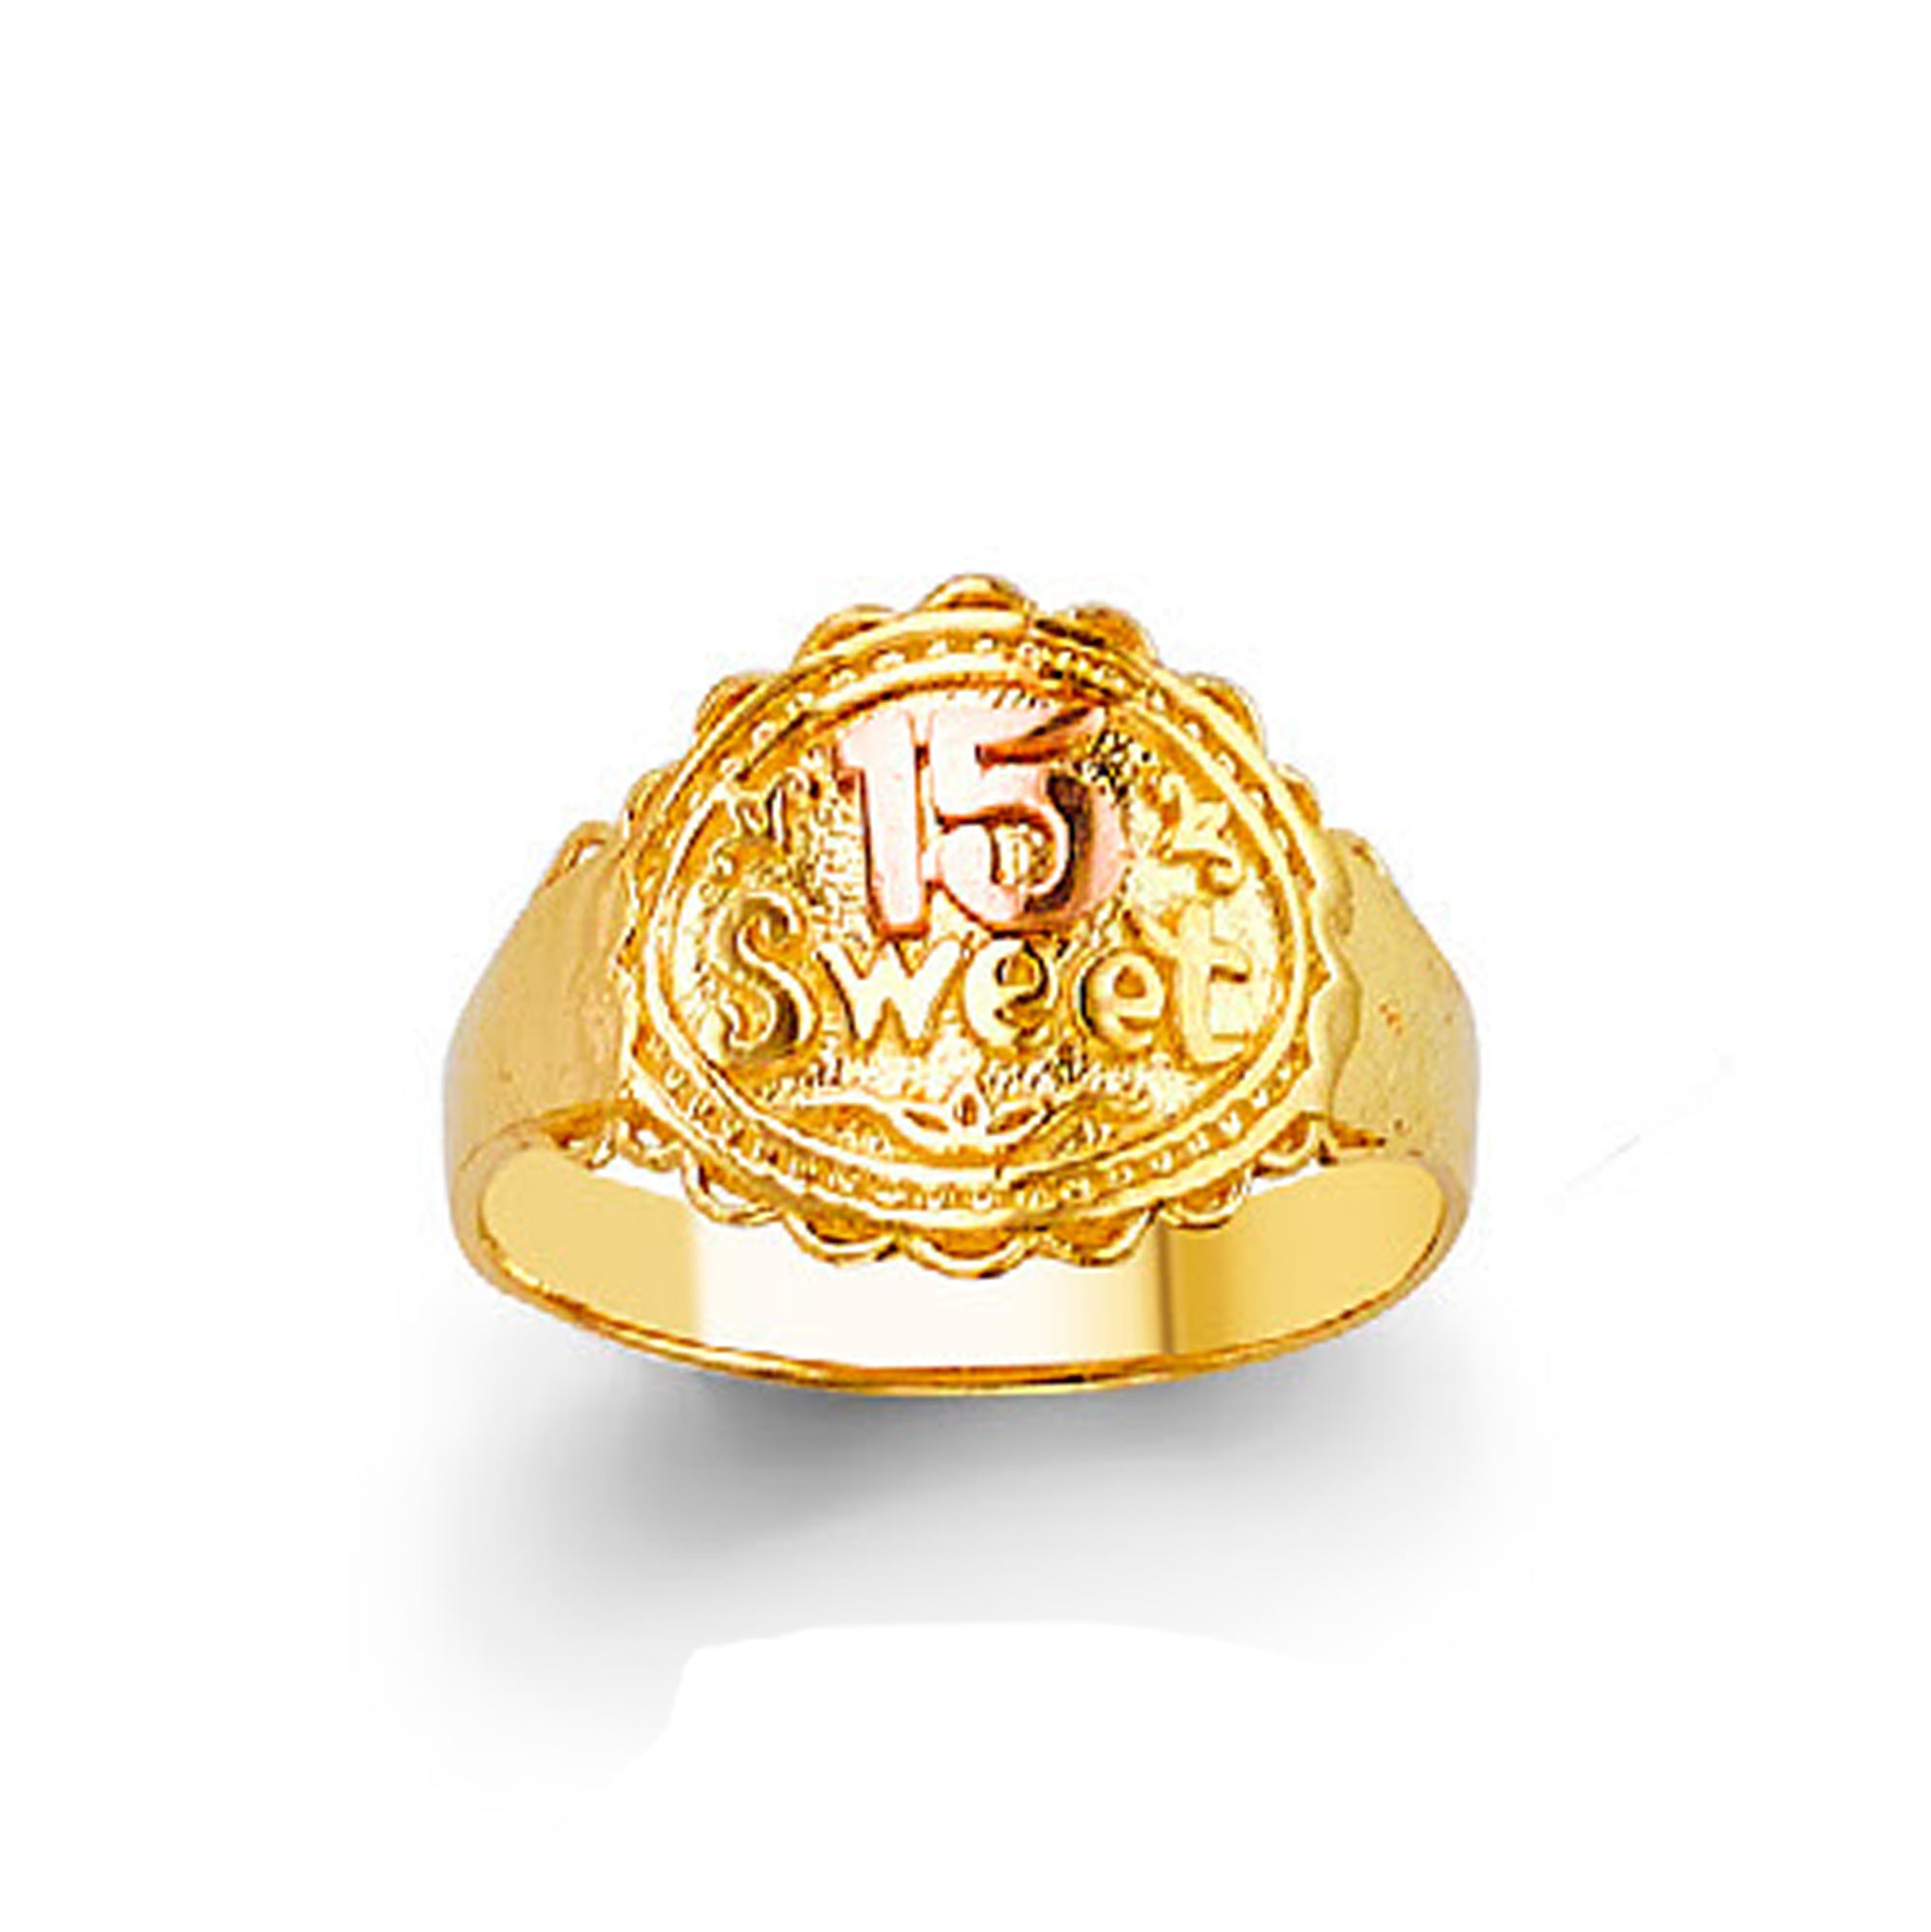 Personalized Numeric Casting Ring in Solid Gold 